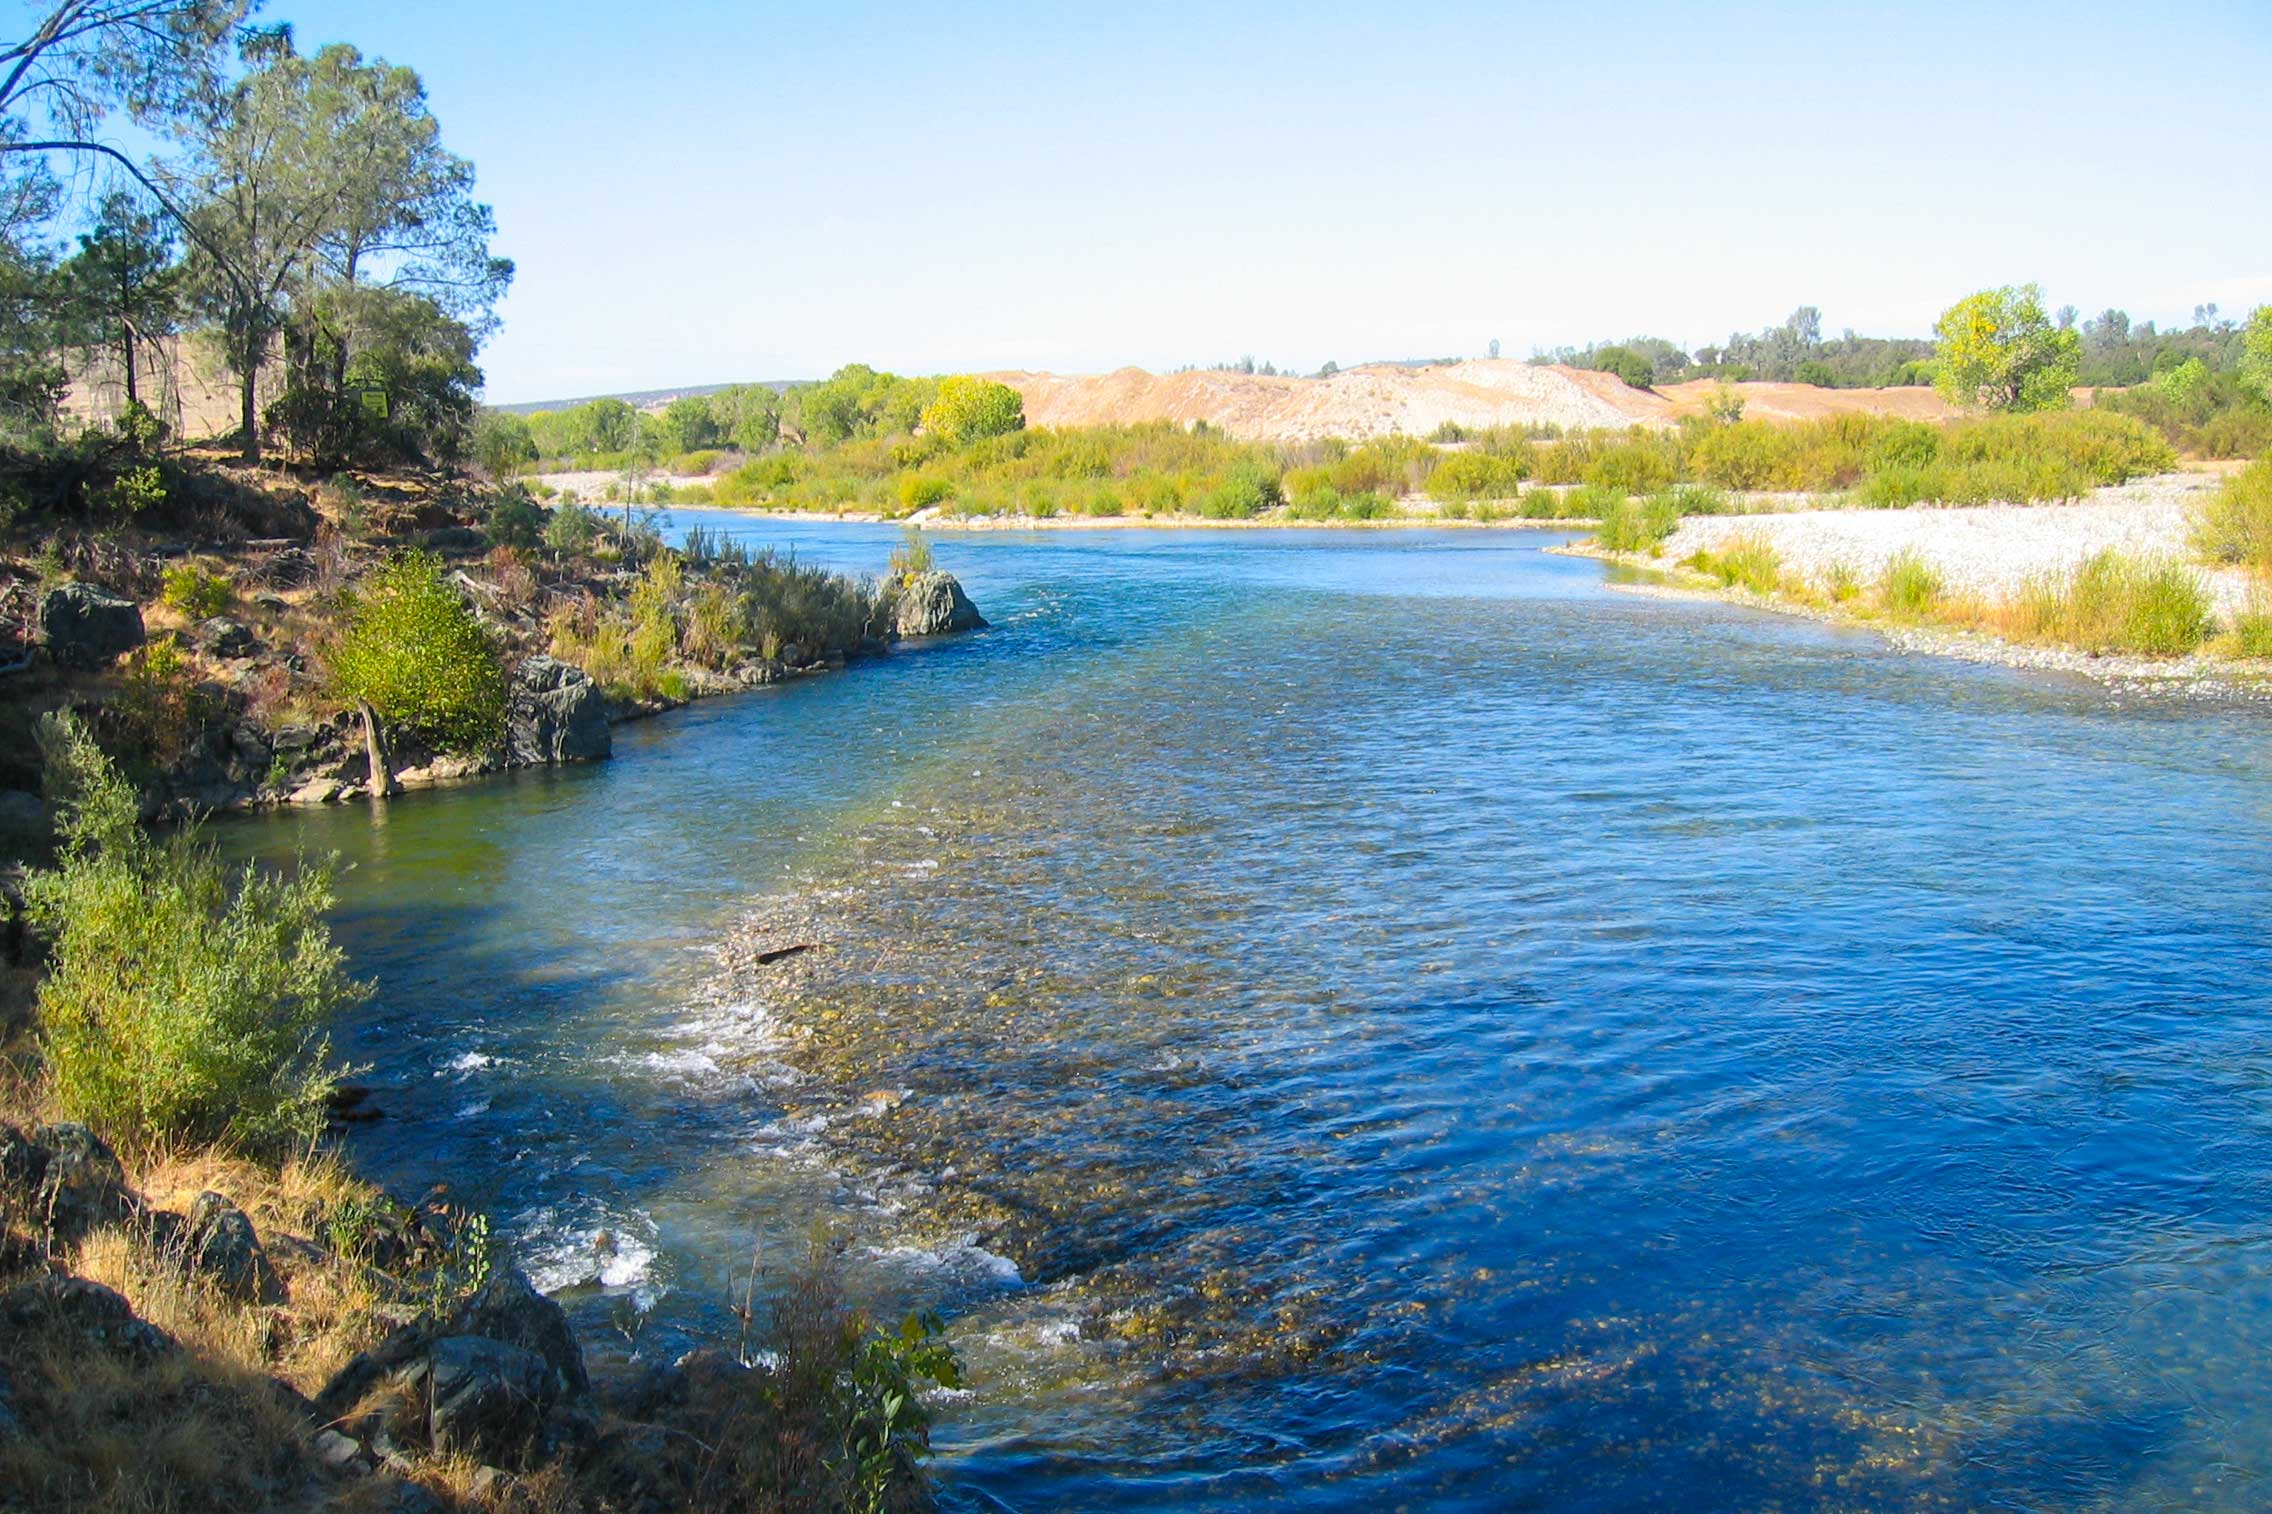 A view of the Yuba River